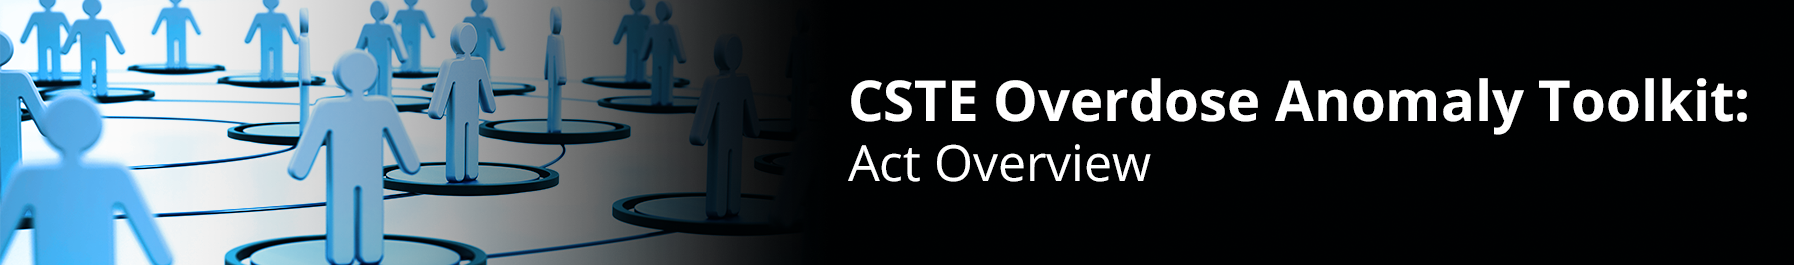 CSTE Overdose Anomaly Toolkit: Act Overview